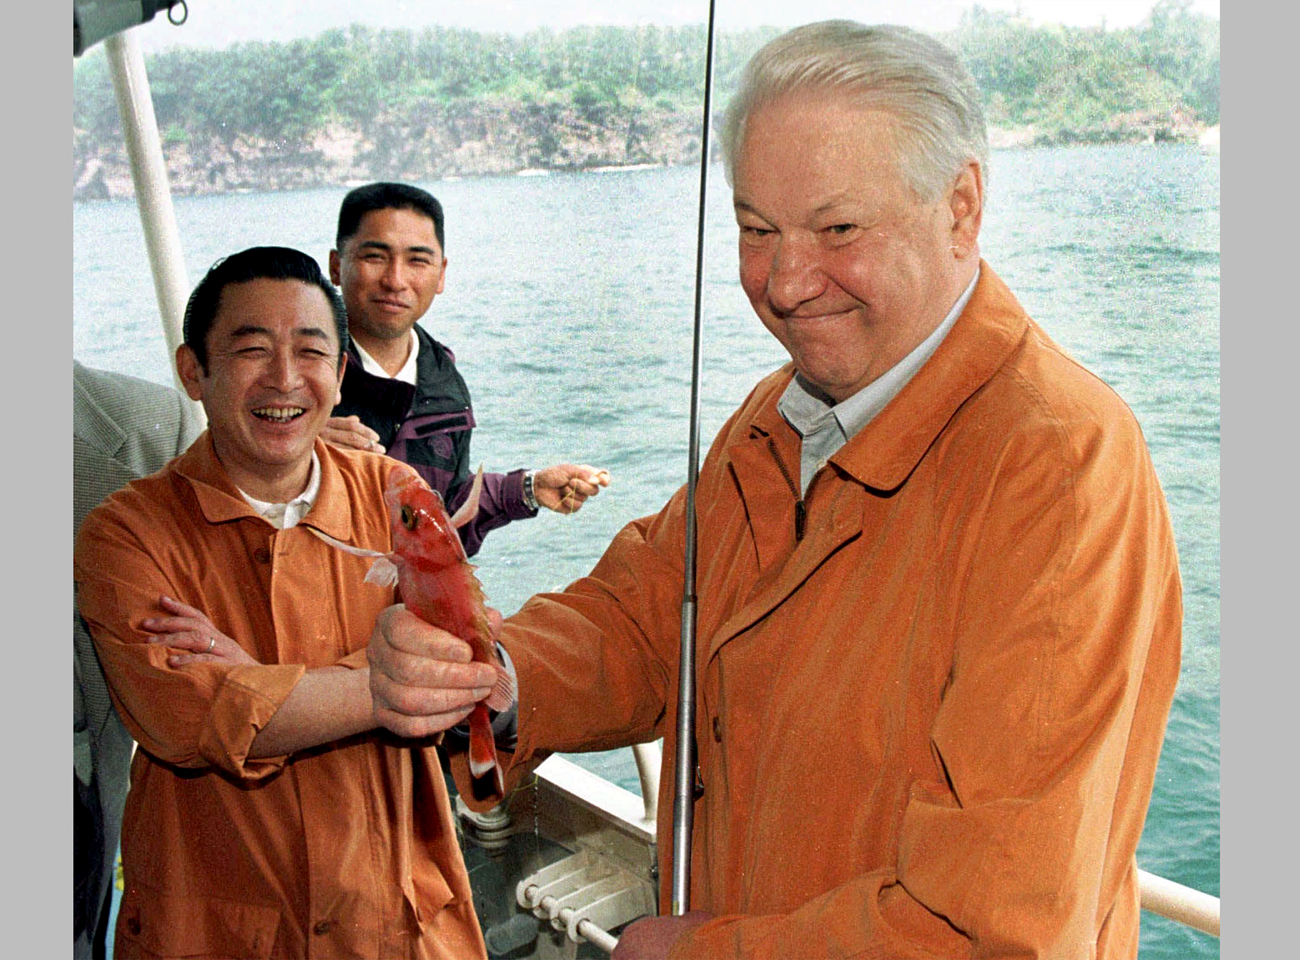  Russian President Boris Yeltsin and Japanese Prime Minister Hashimoto with a good catch on a luxury motor cruiser on a fishing trip in April 1998. Source: Alexander Sentsov/TASS